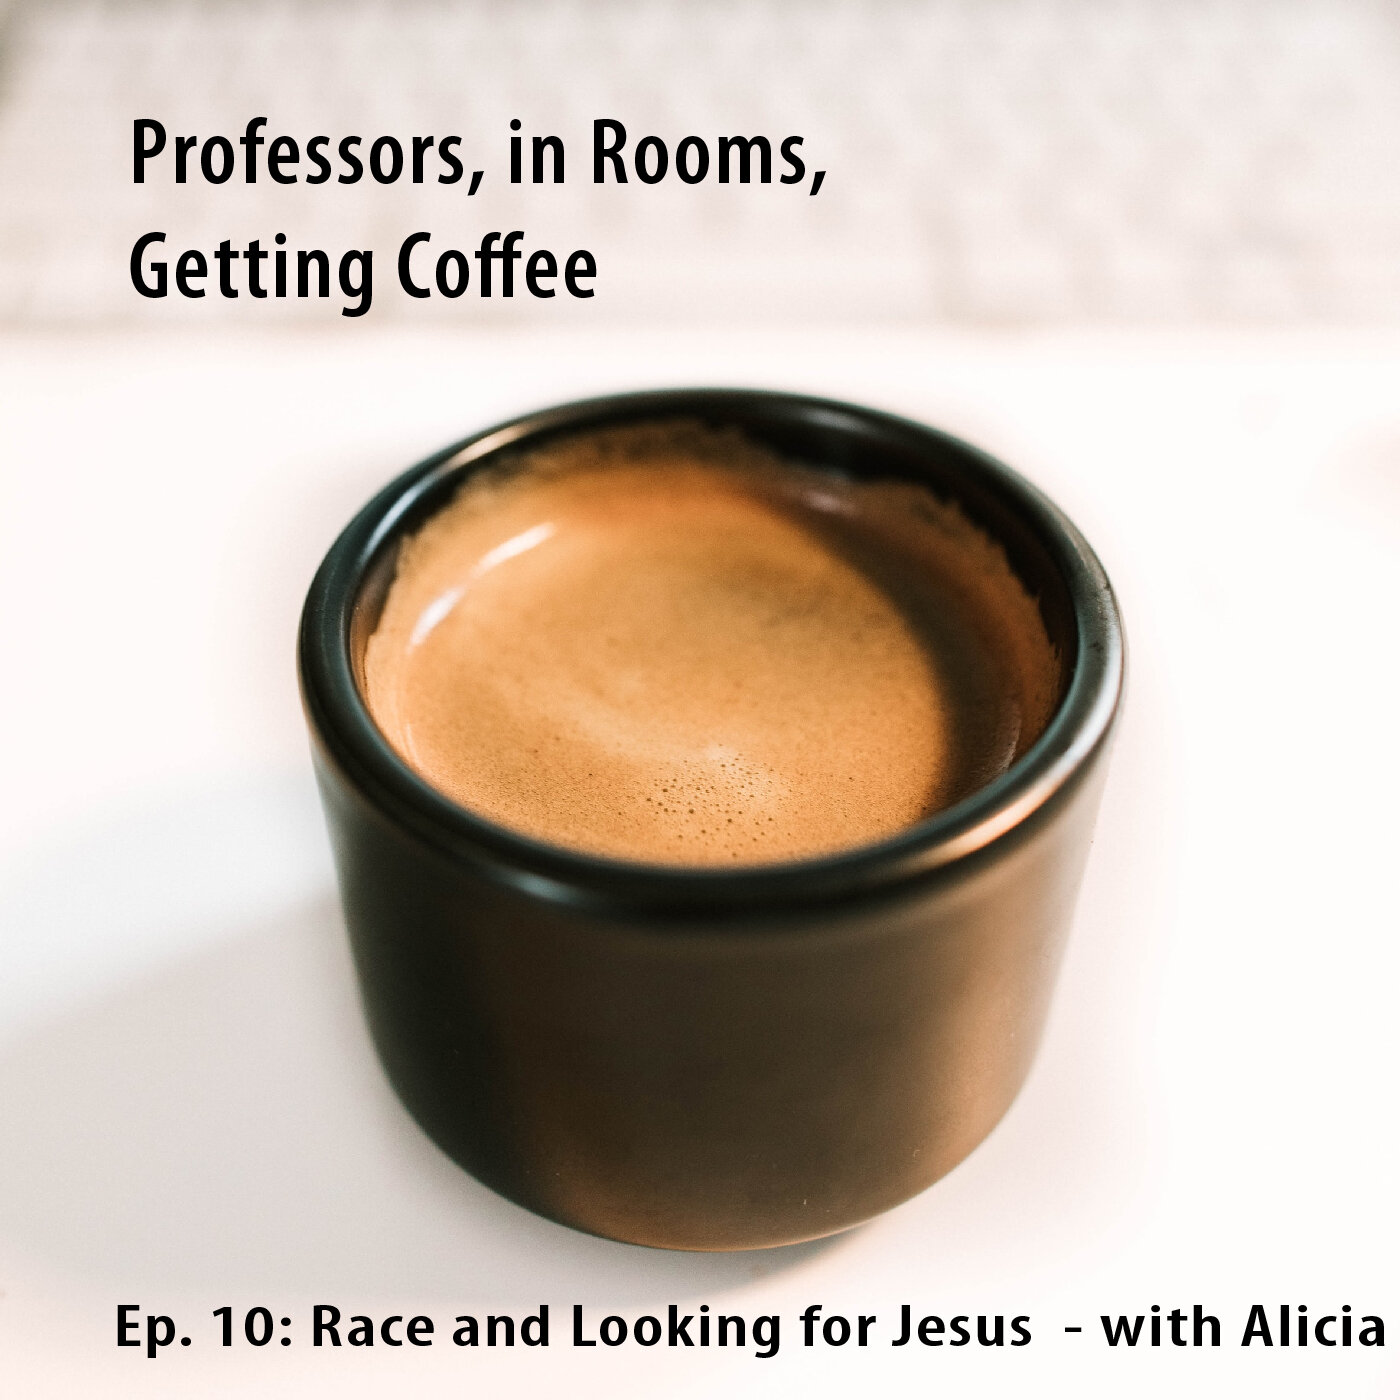 Race and looking for Jesus - with Alicia